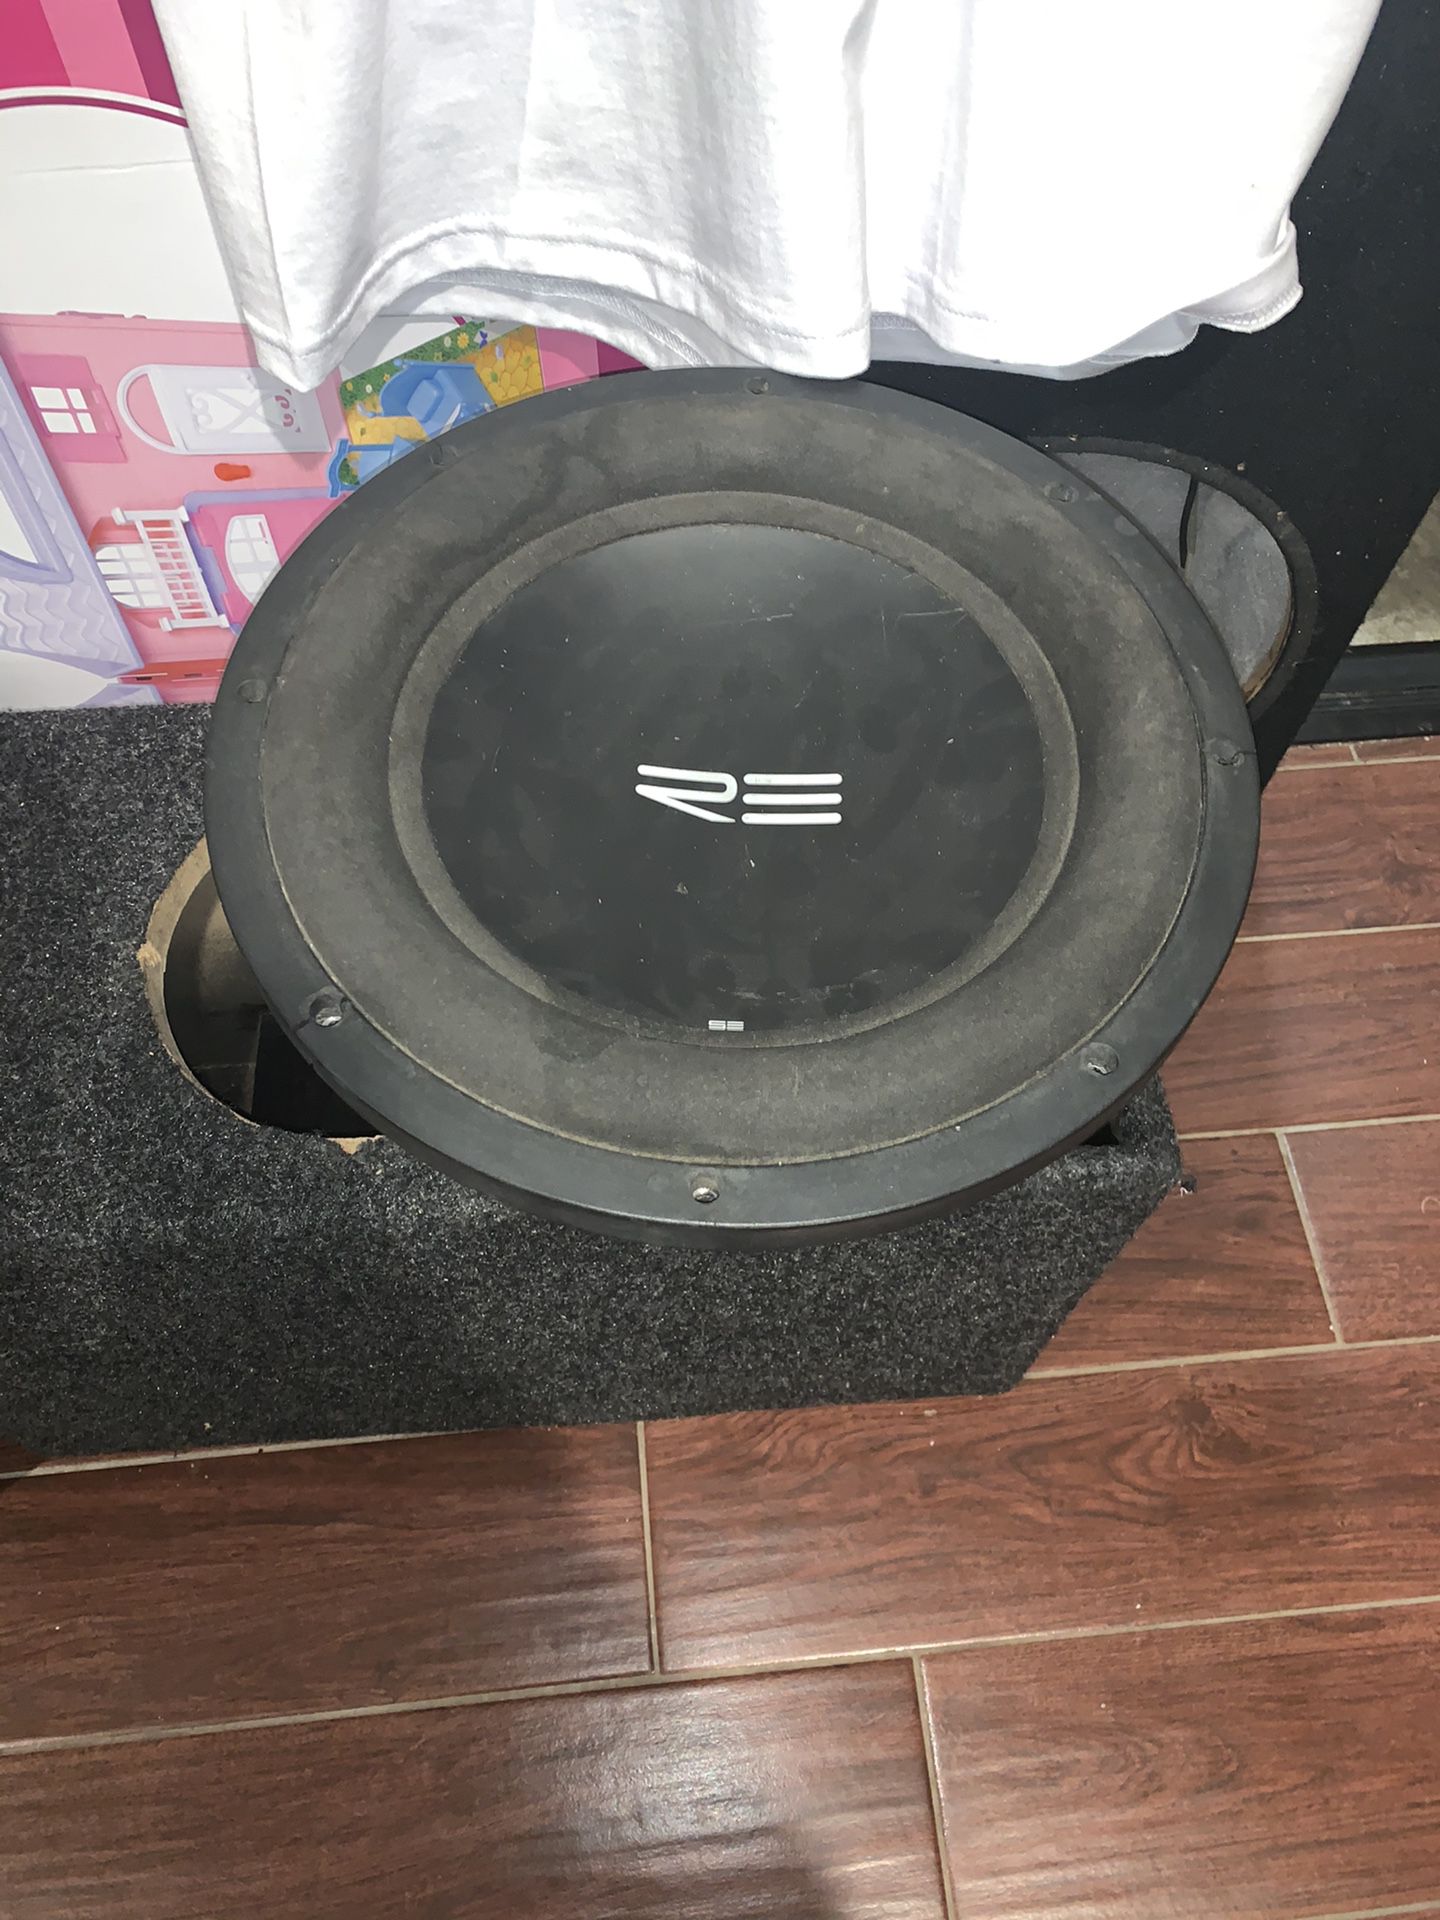 12” re sub (Non working ) for parts or repair (no box)